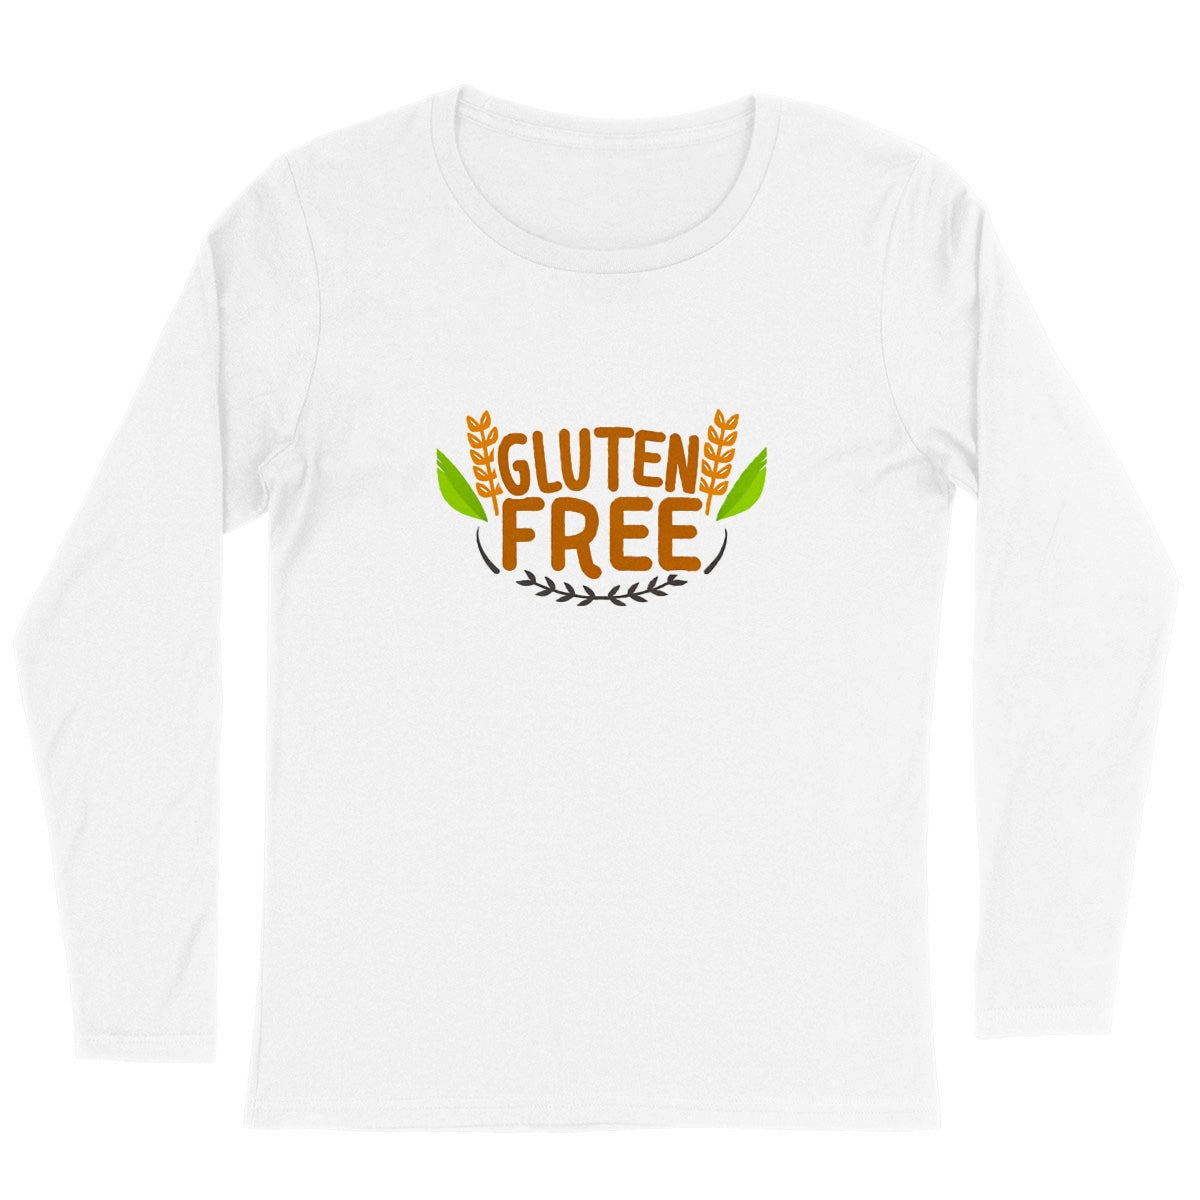 Gluten Free Long Sleeve Organic Cotton Graphic Shirt | Hypoallergenic - Allergy Friendly - Naturally Free